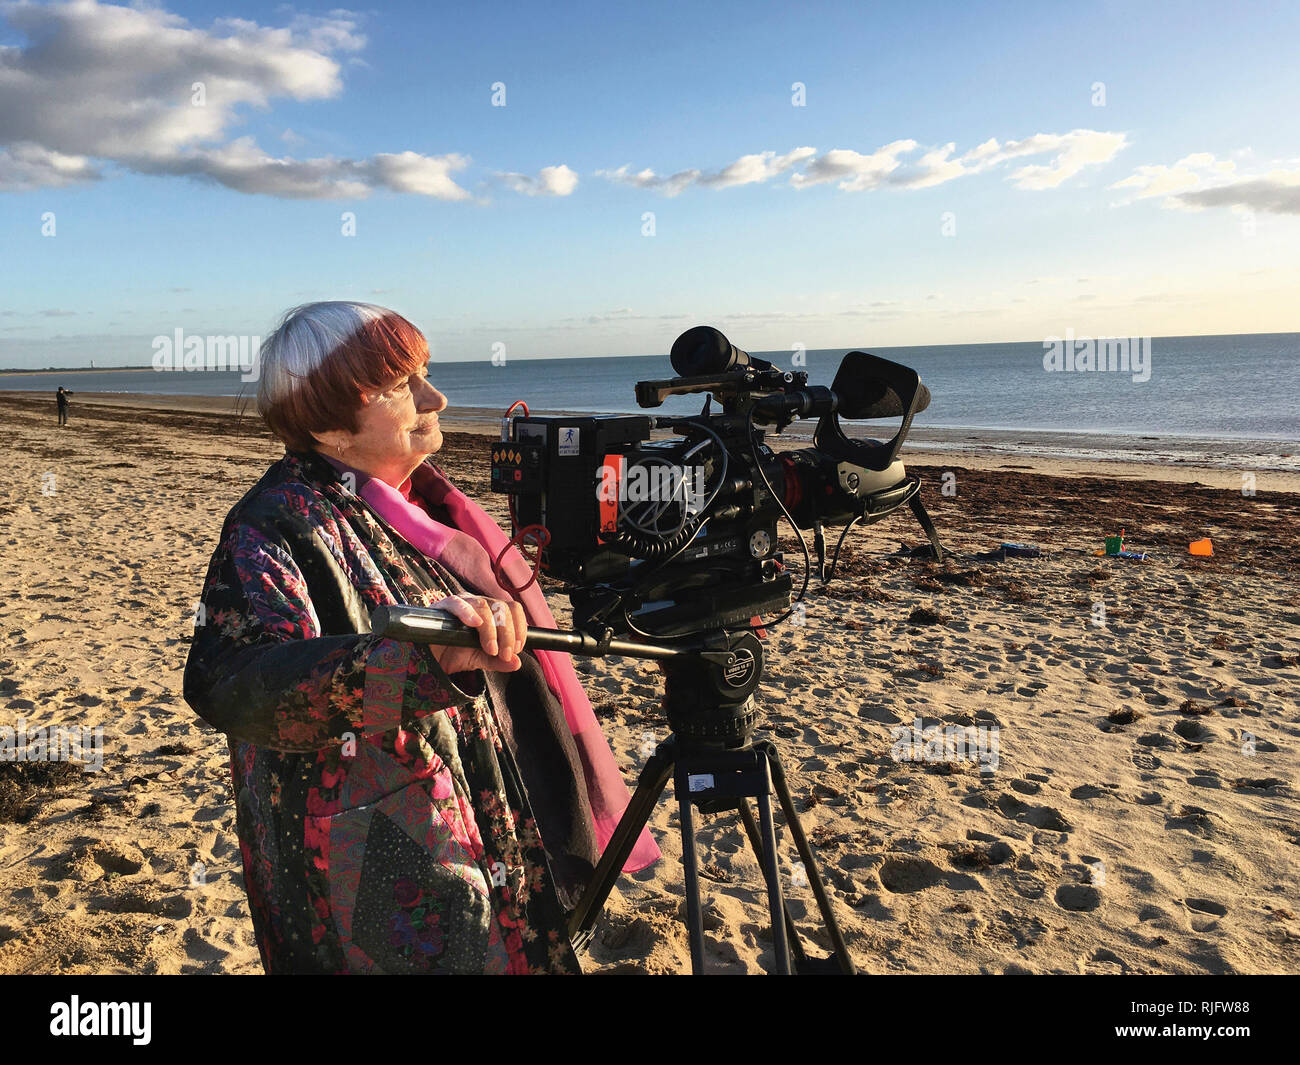 HANDOUT - 22 January 2019, ---: Agnes Varda in a scene of the documentary  "Varda par Agnes" ("Varda by Agnes"). The autobiographical film by Agnès  Varda belongs to the competition films of